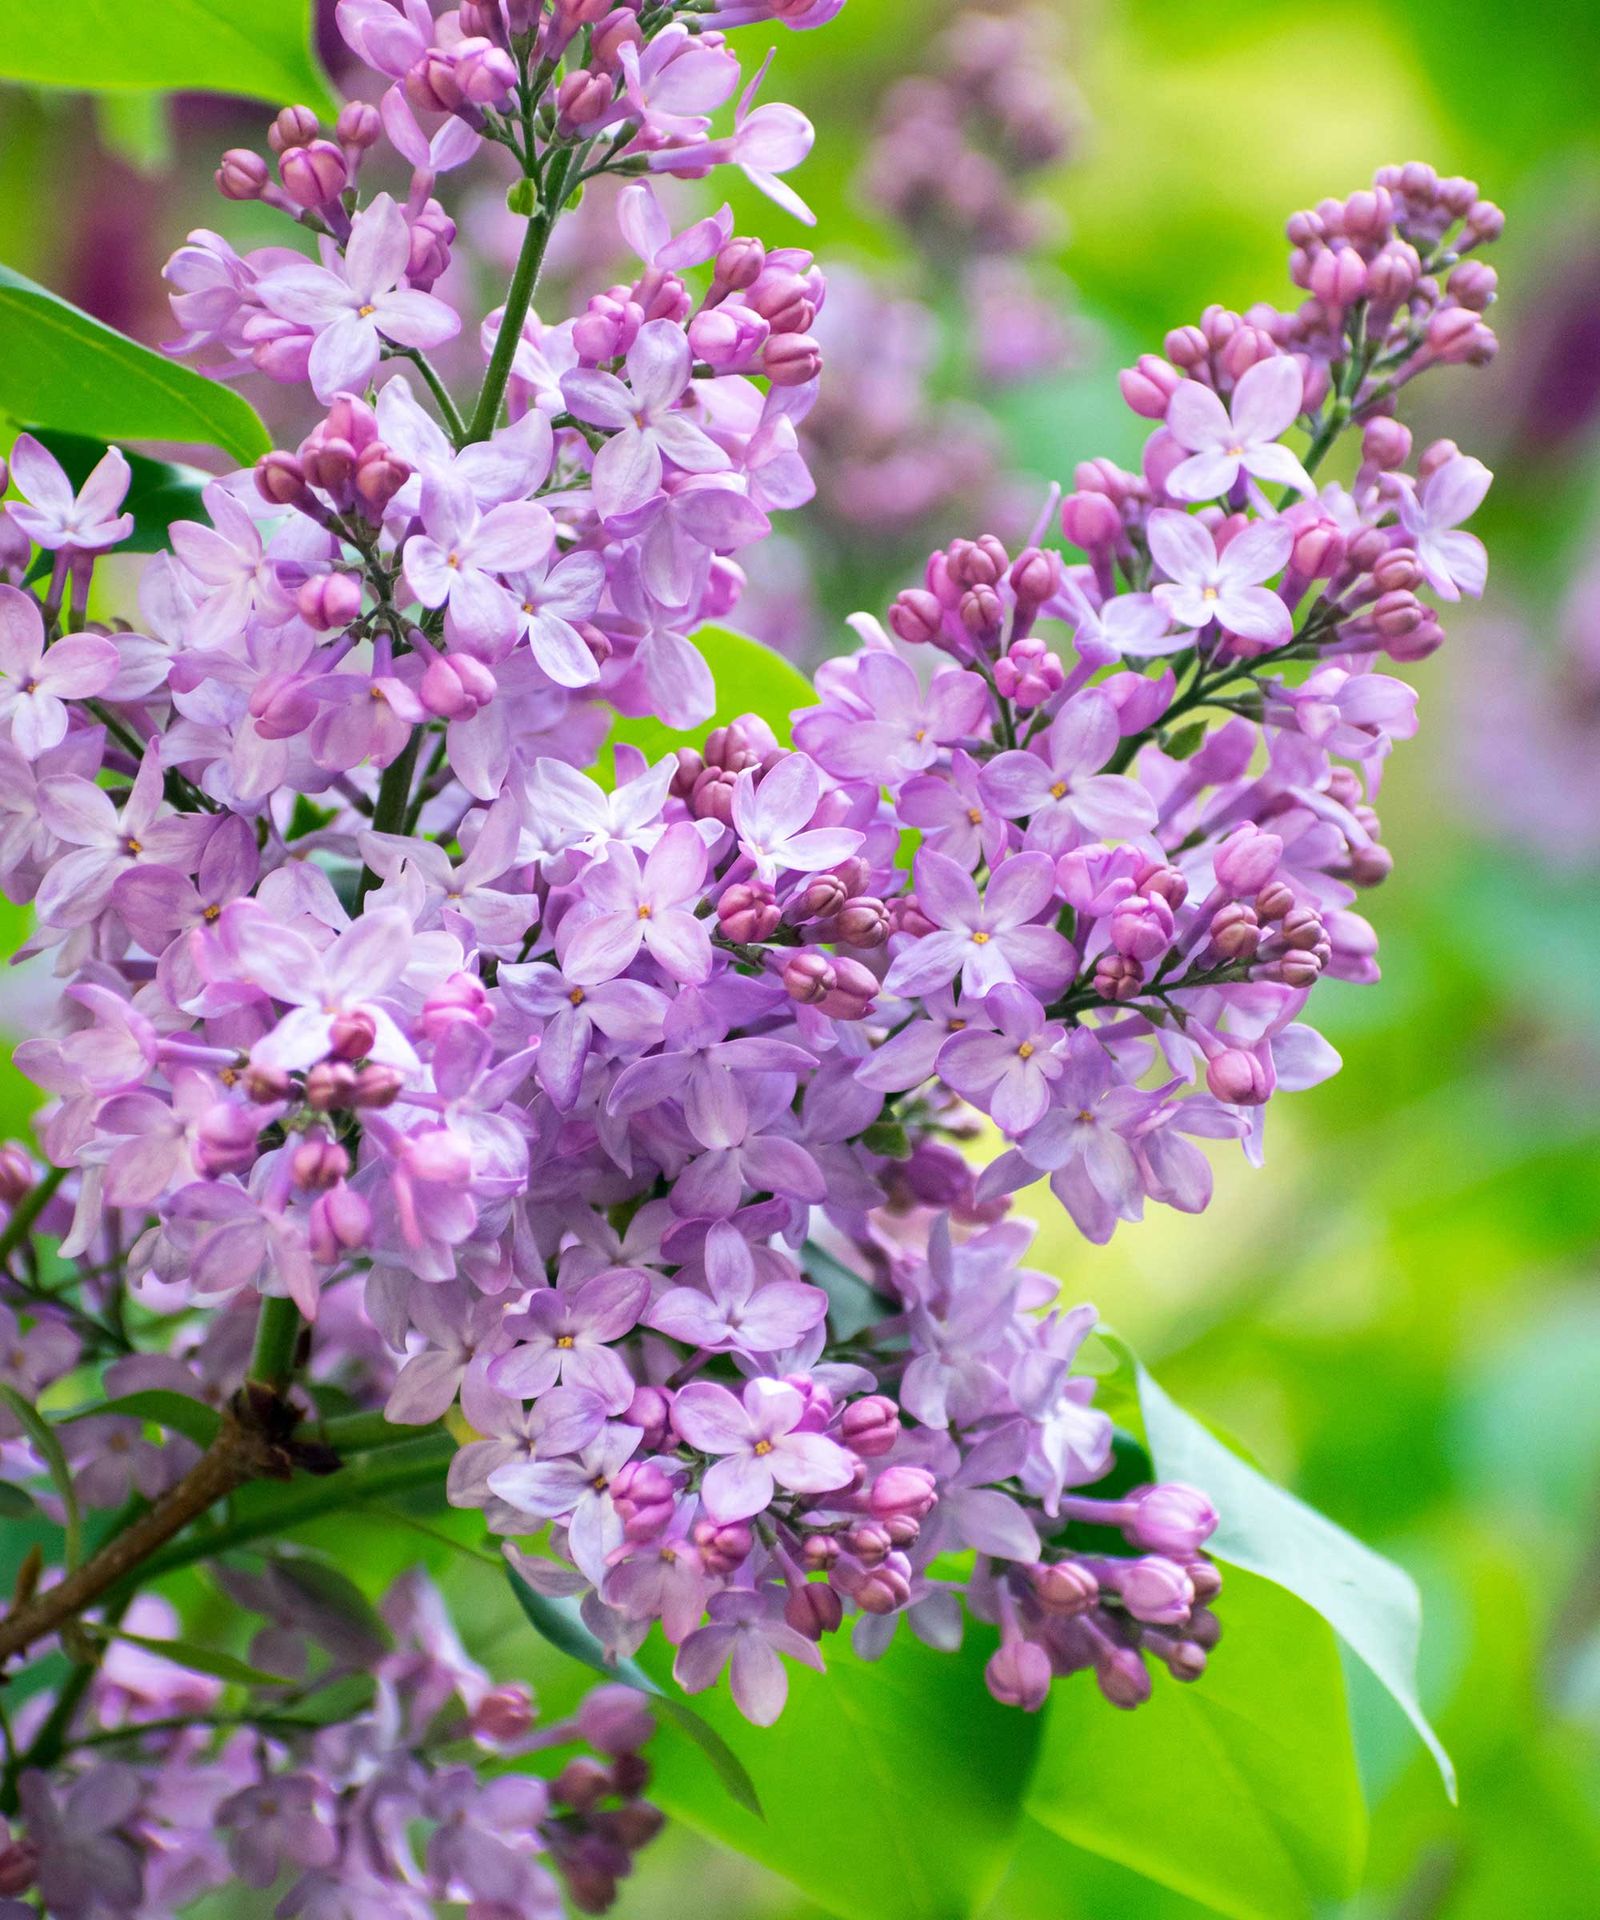 How to propagate lilacs: expert tips for taking cuttings